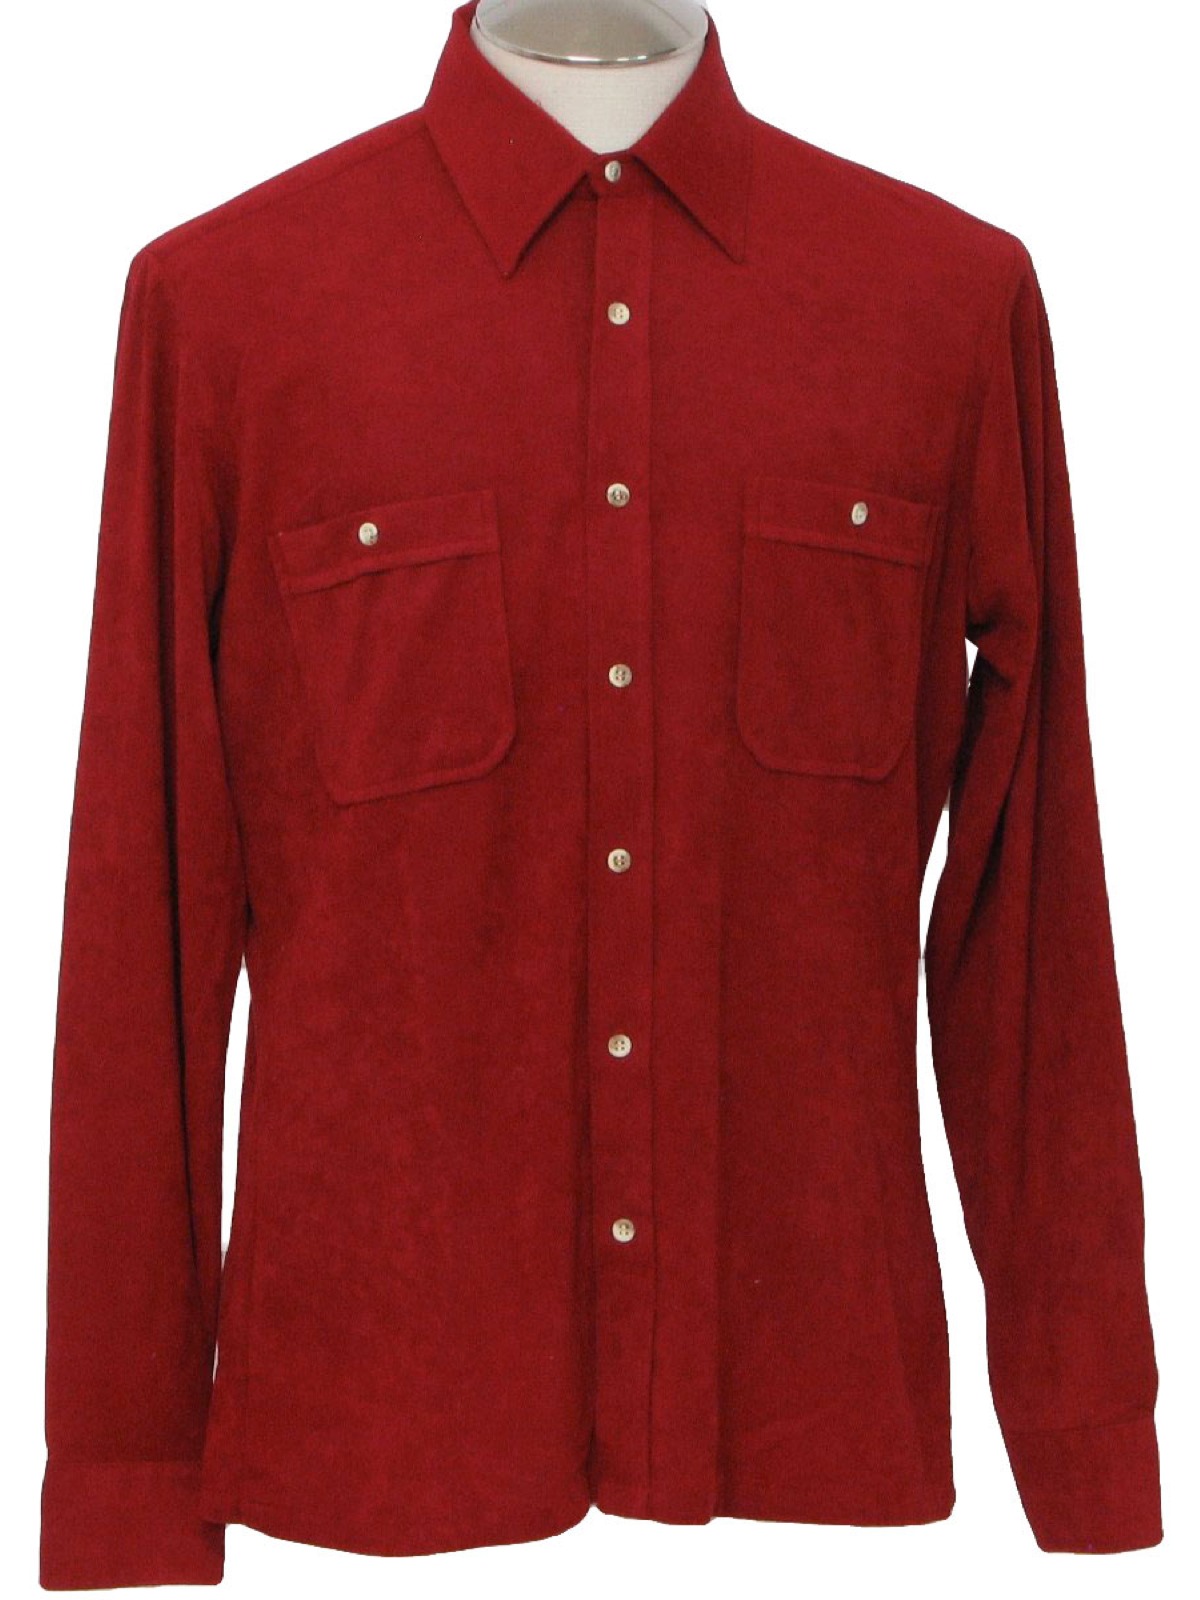 mens red button up shirt harry styles